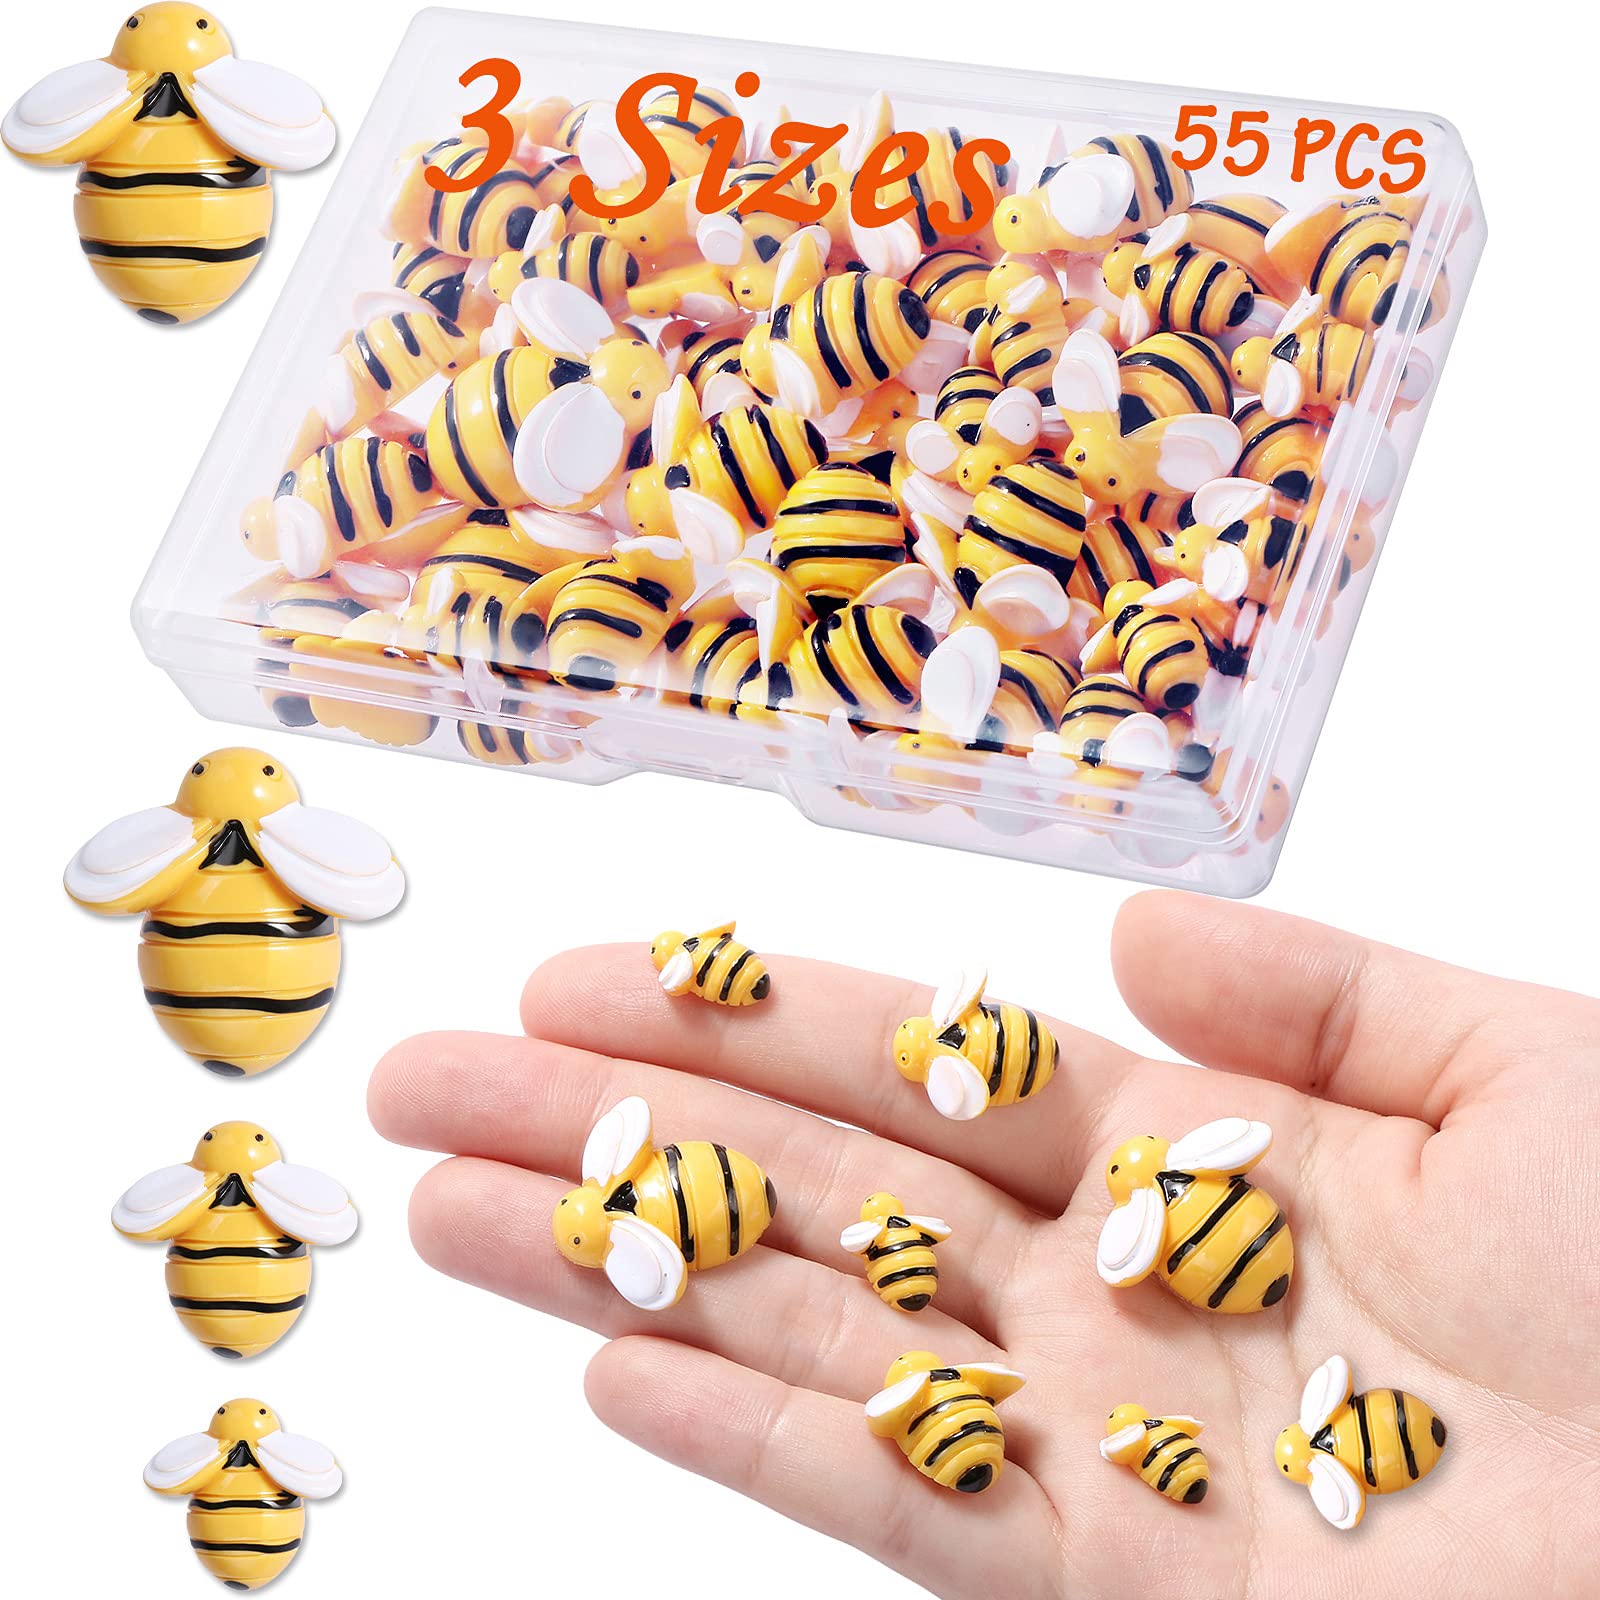 MIKIMIQI 55 Pcs Tiny Resin Bees Decor Bumble Bee Embellishment Resin Bees  Craft Decorations with Storage Box for DIY Craft Wreath Scrapbooking Party  Home Decor 0.98 Inch 0.74 Inch 0.55 Inch